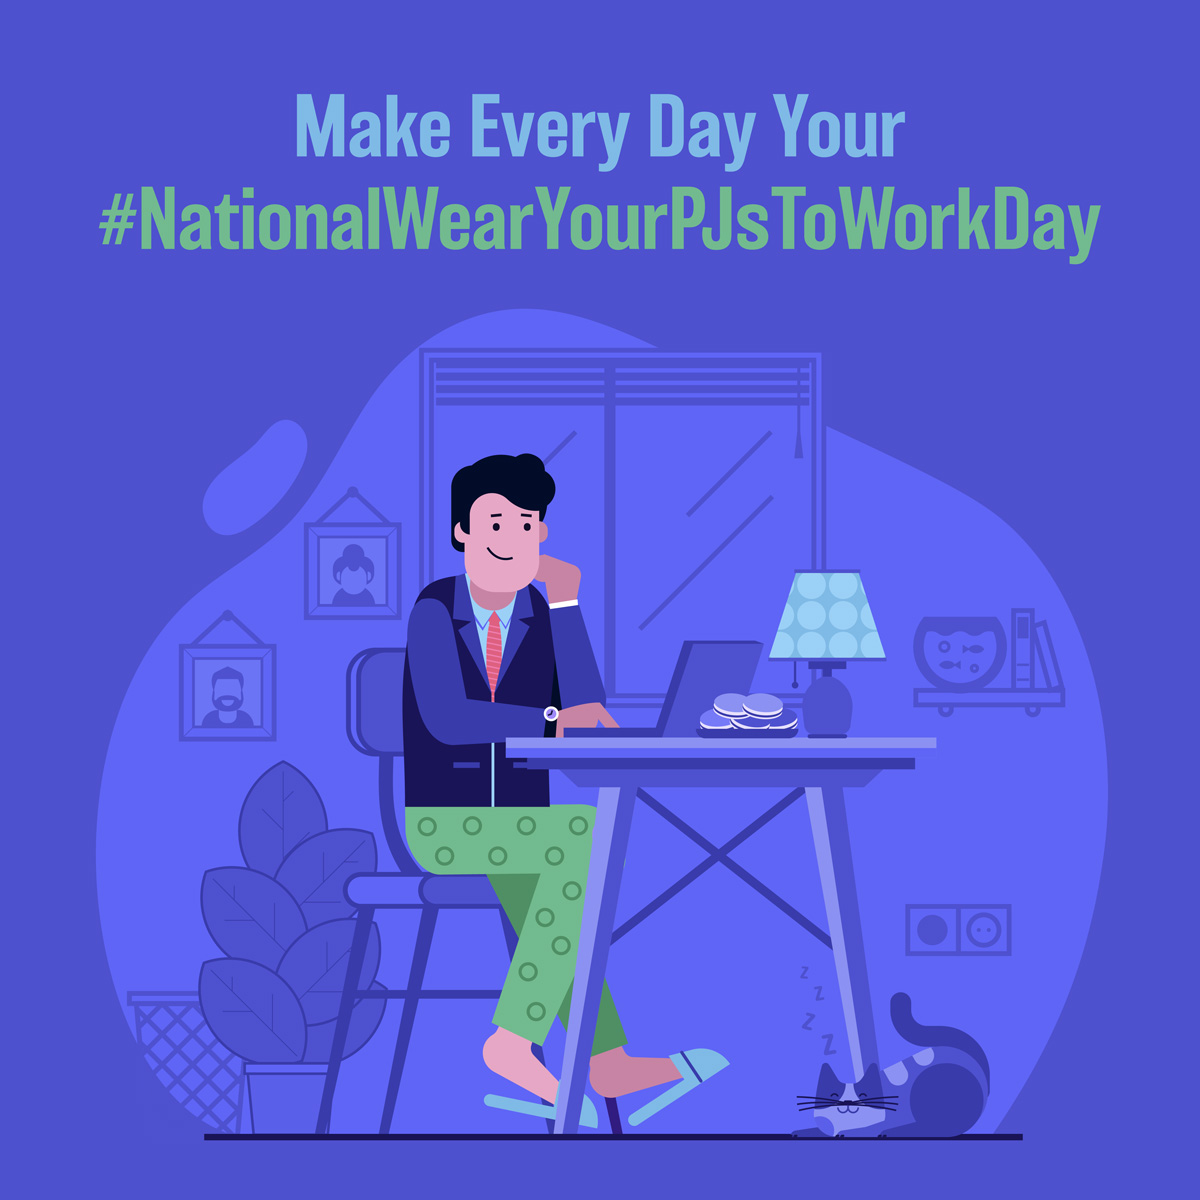 Happy #NationalWearYourPajamasToWorkDay! 🎉 Let's chat about getting your own home office! 🏡💻

🐺🐺🐺🐺
#Loanwolflending
#Mortgagebroker
#Homeloanswithabite
#Abetterbreedofhomeloans